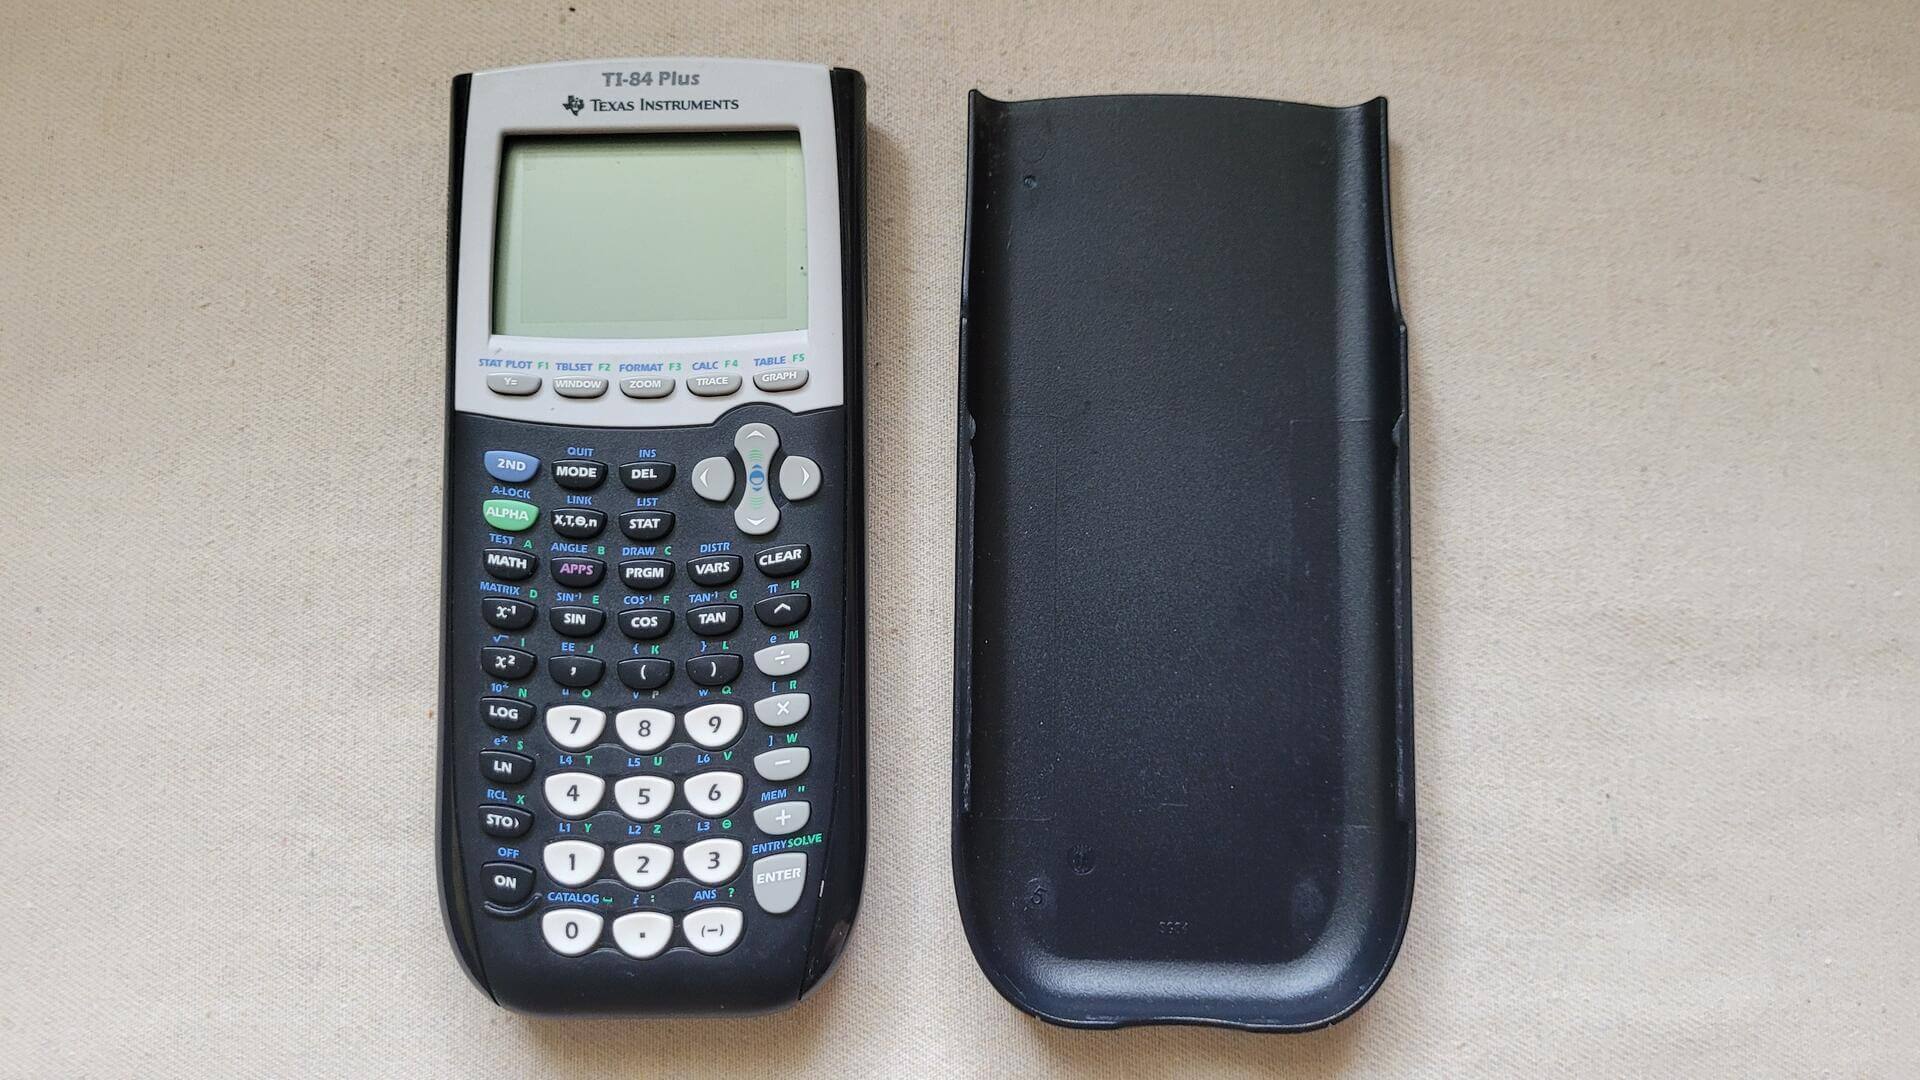 Texas Instruments TI-84 Plus Scientific Graphing Calculator w Case - Educational and Scientific Tools for geometry and data analysis